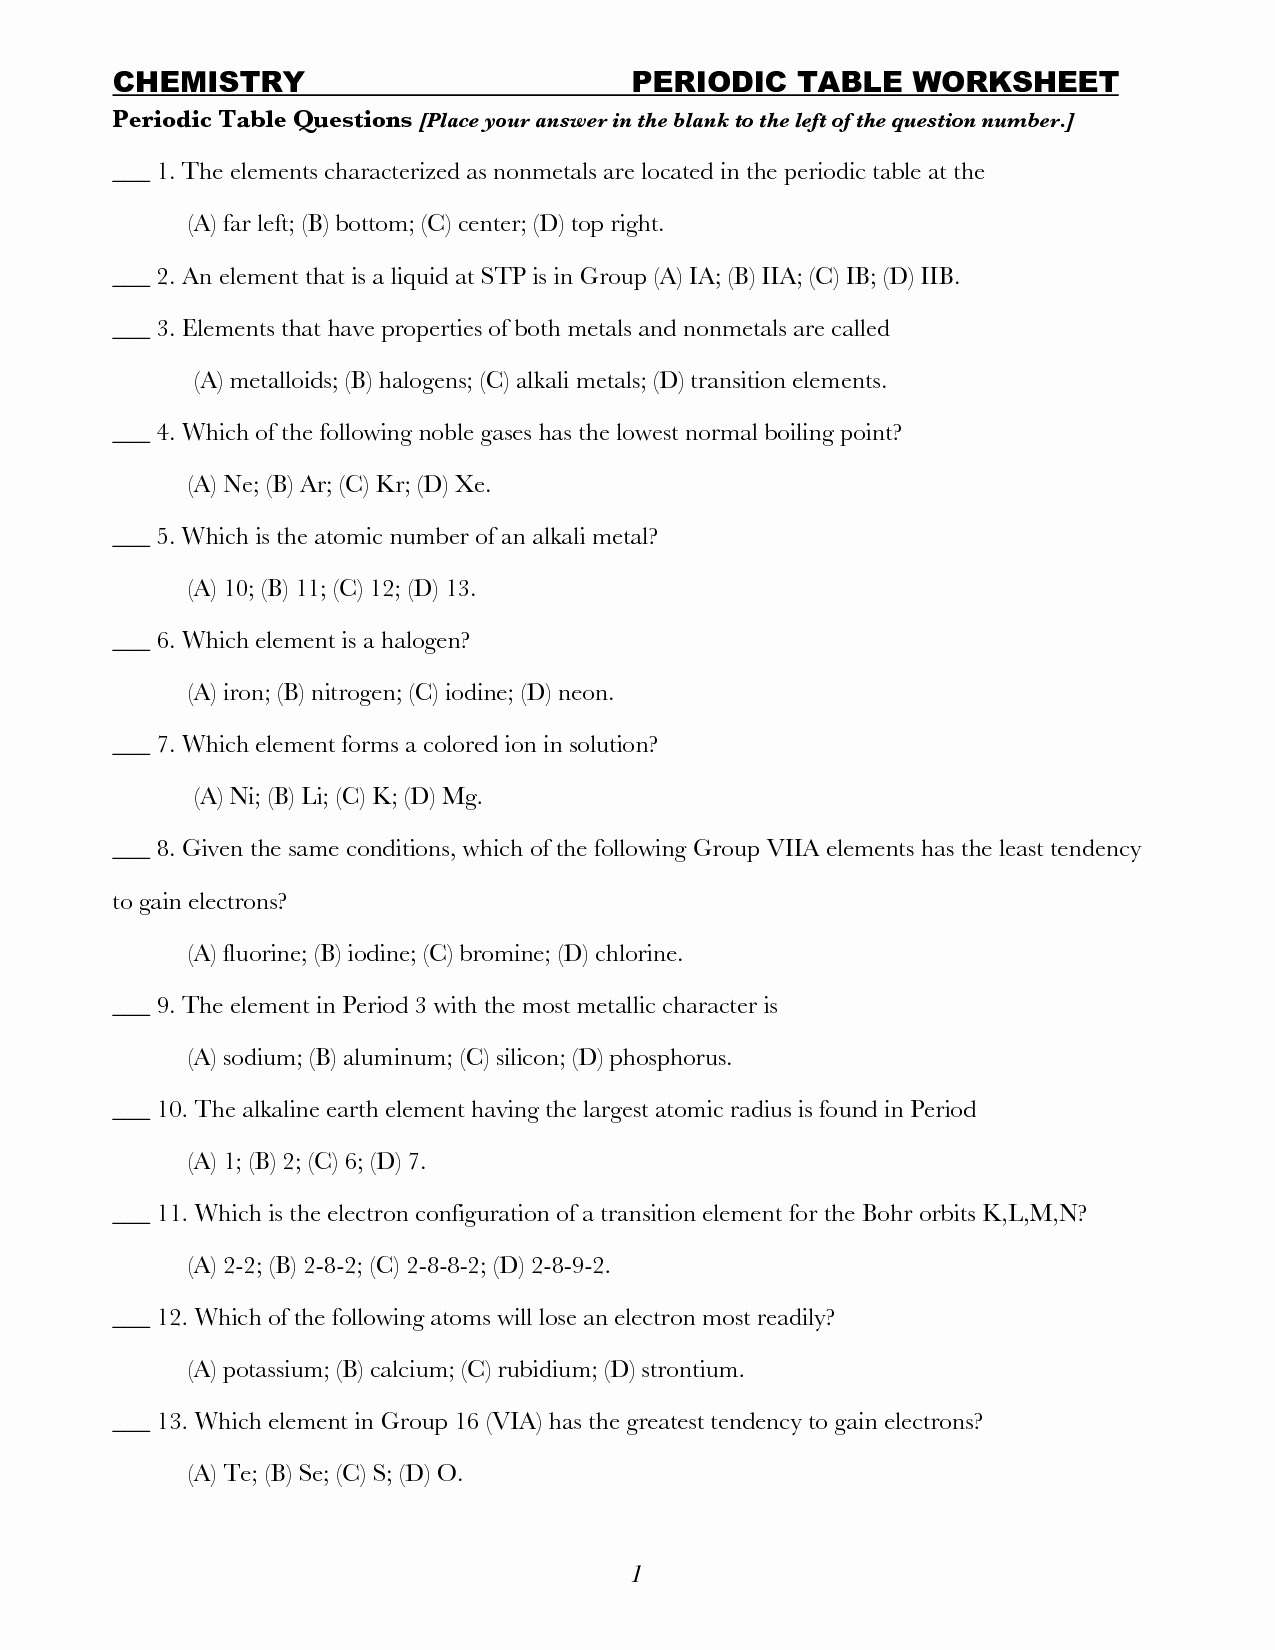 Periodic Table Worksheet Answers Best Of 20 Best Of Periodic Trends Worksheet Answers Key